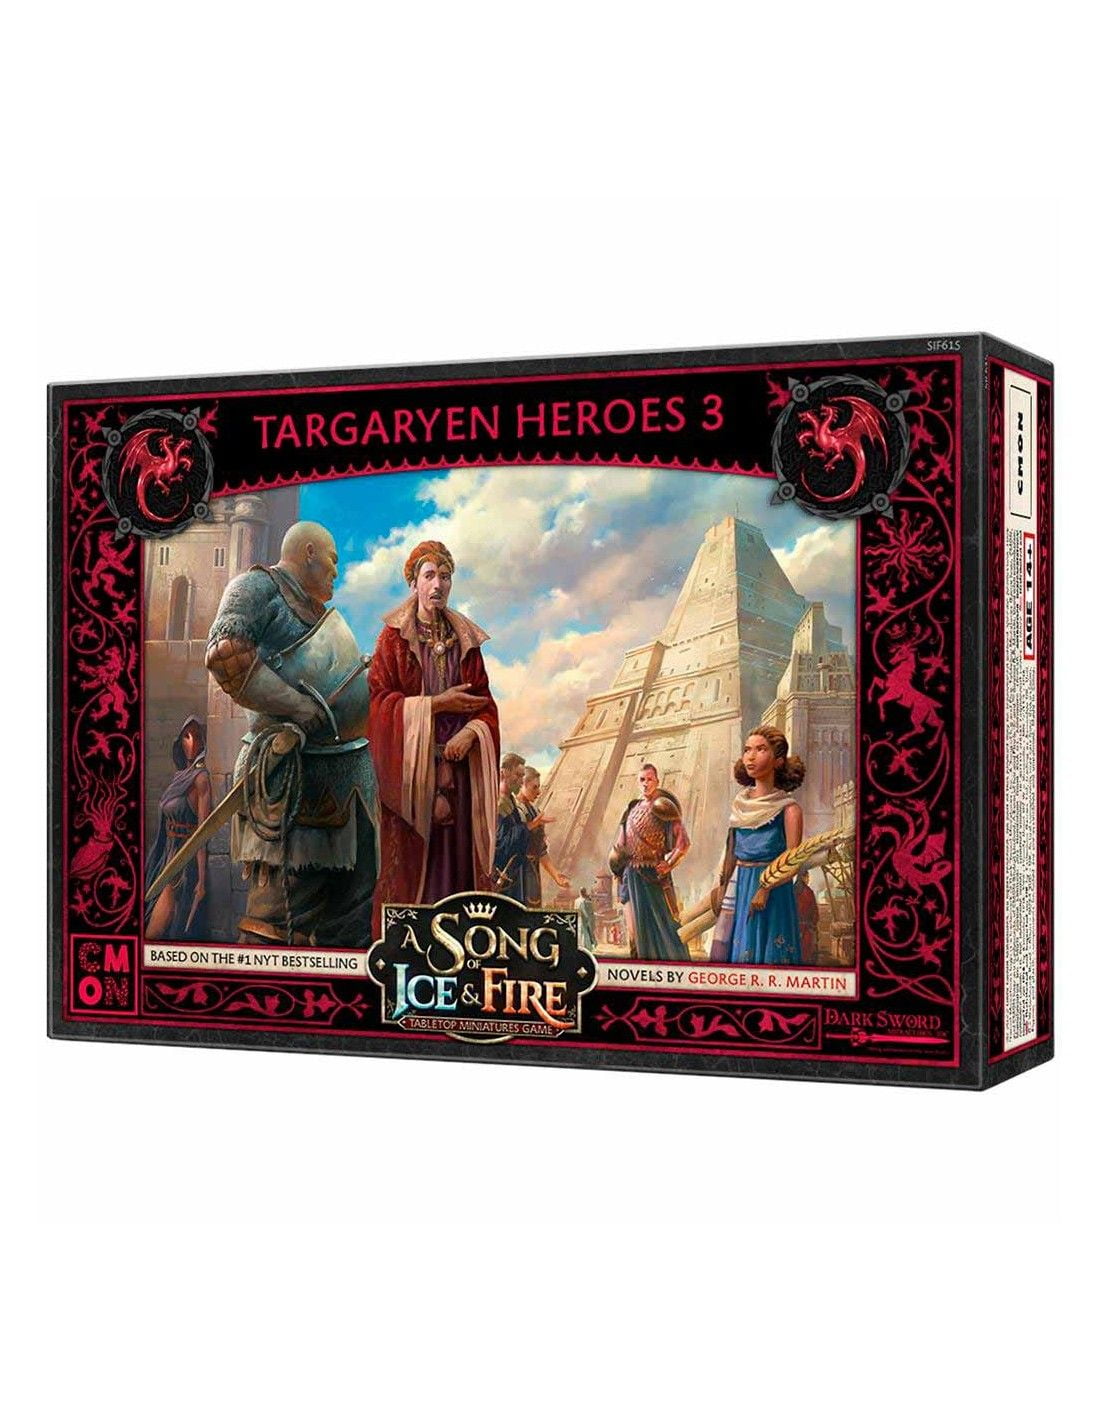 A Song of Ice and Fire: Targaryen Heroes 3